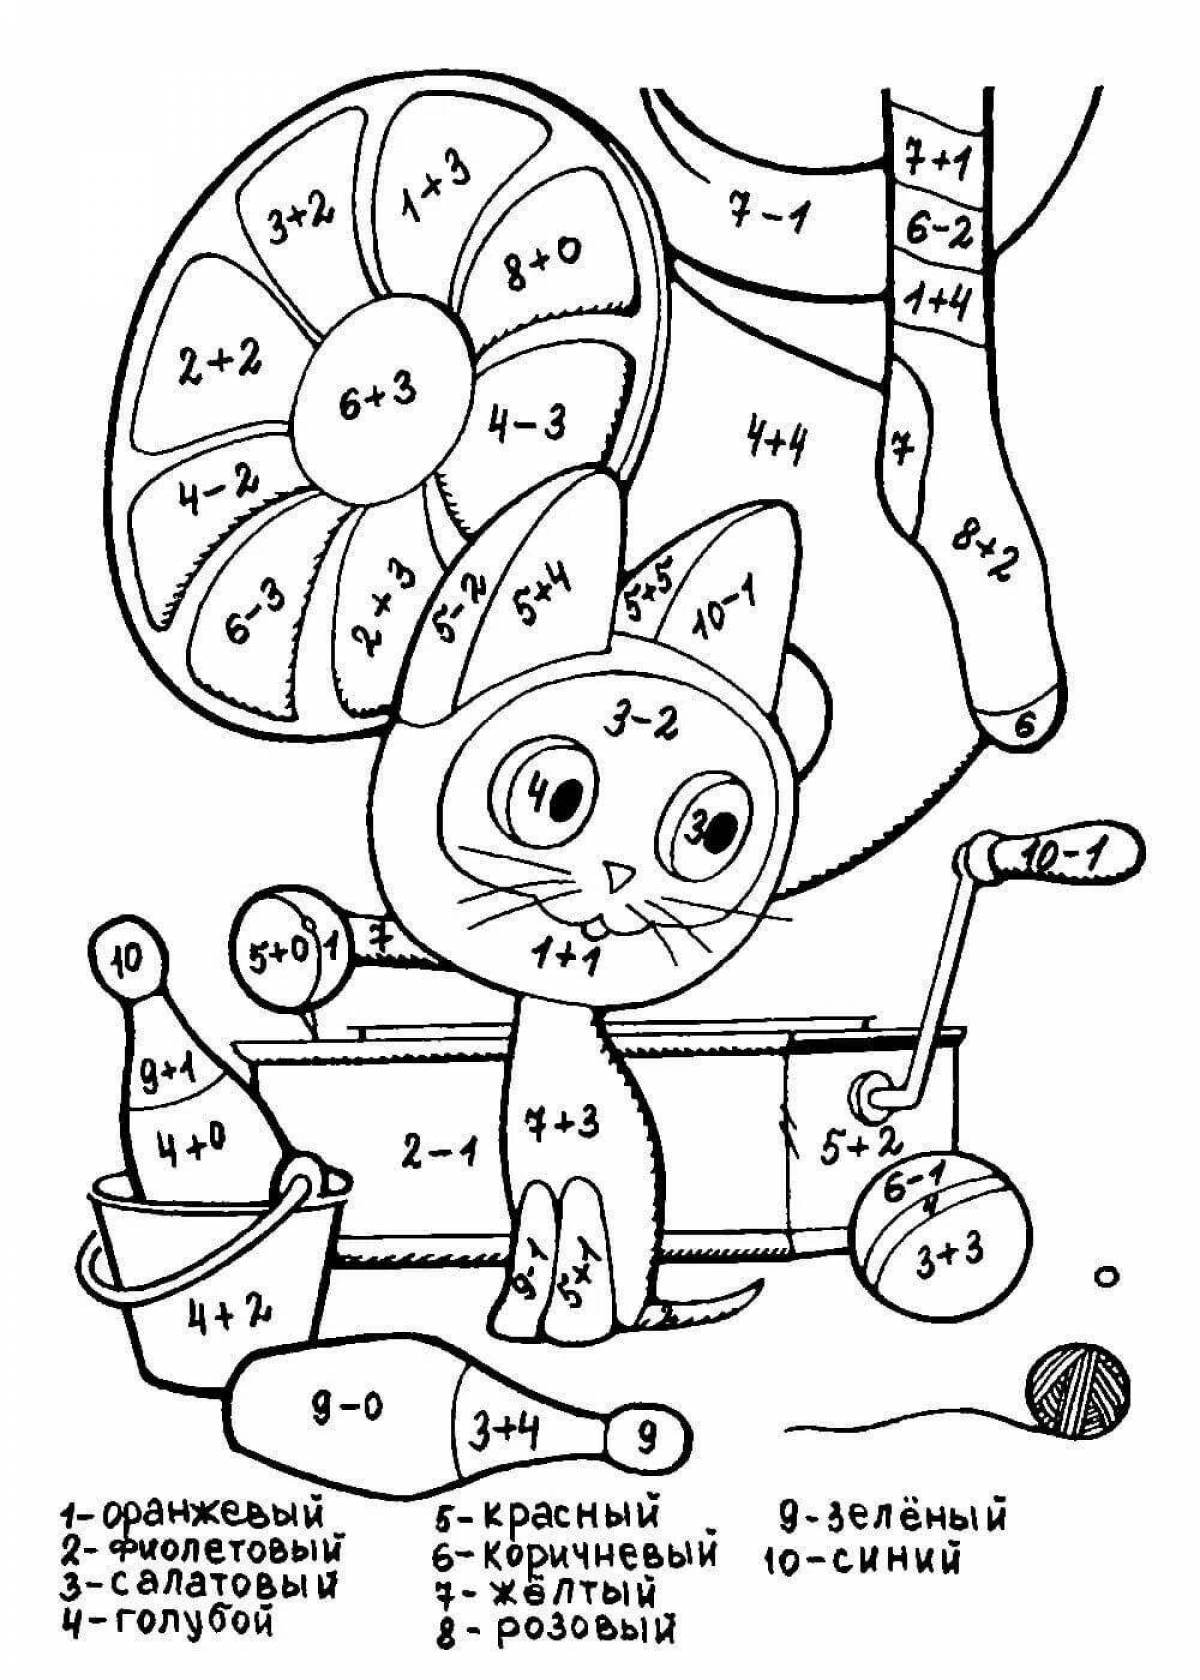 Coloring page of fun math problems